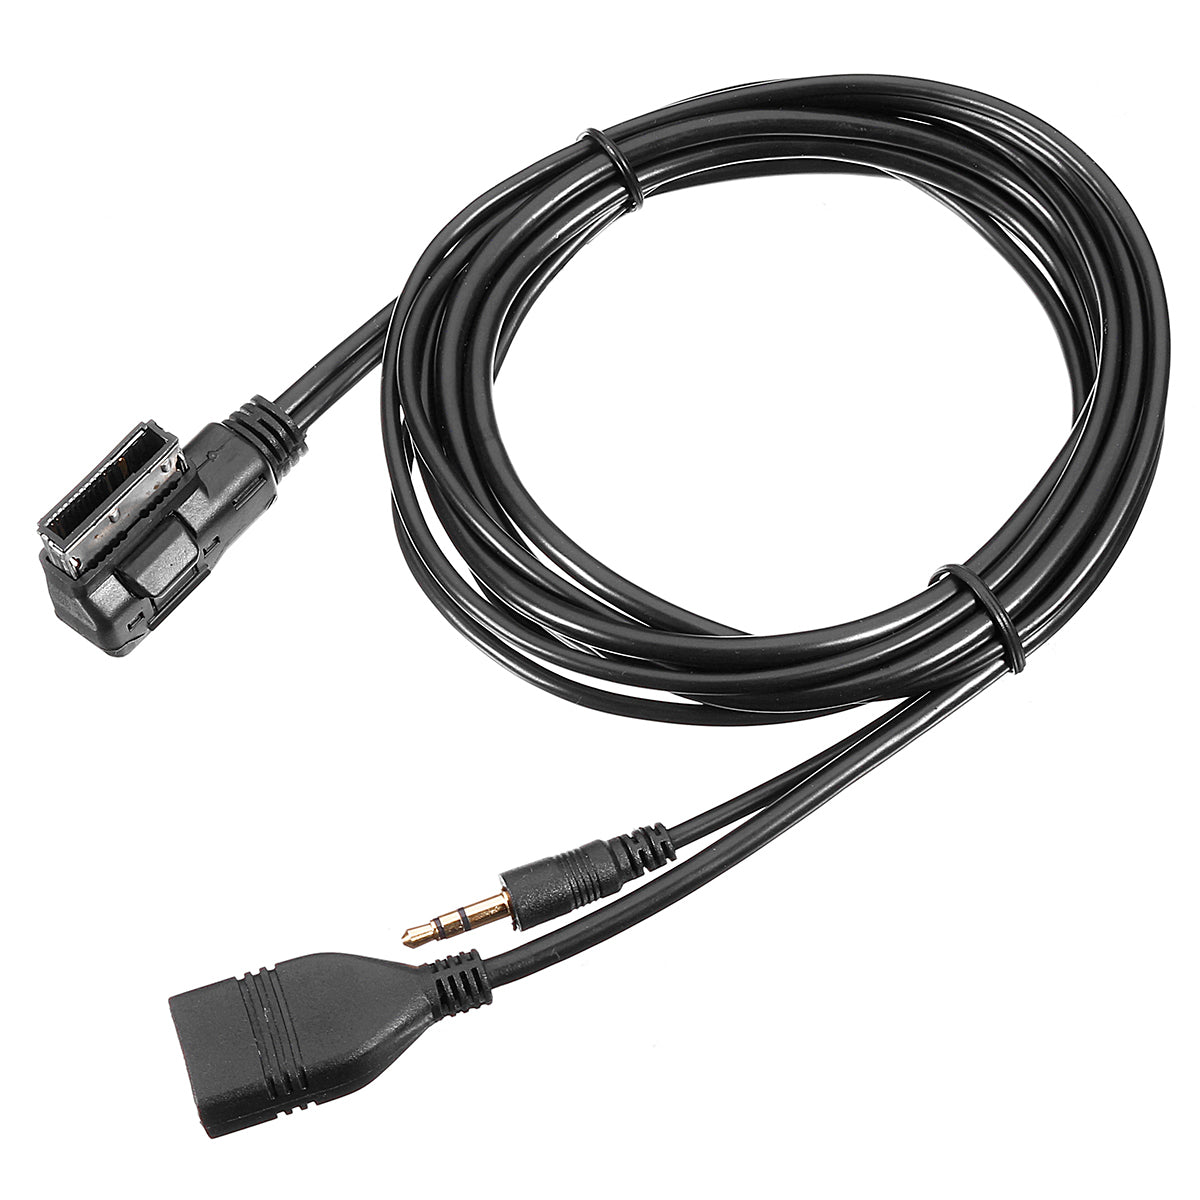 AMI MDI Music to 3.5mm AUX Audio Cable with USB Charger Port For VW Audi A4 A6 A8 S4 S6 Q5 Q7 - Auto GoShop